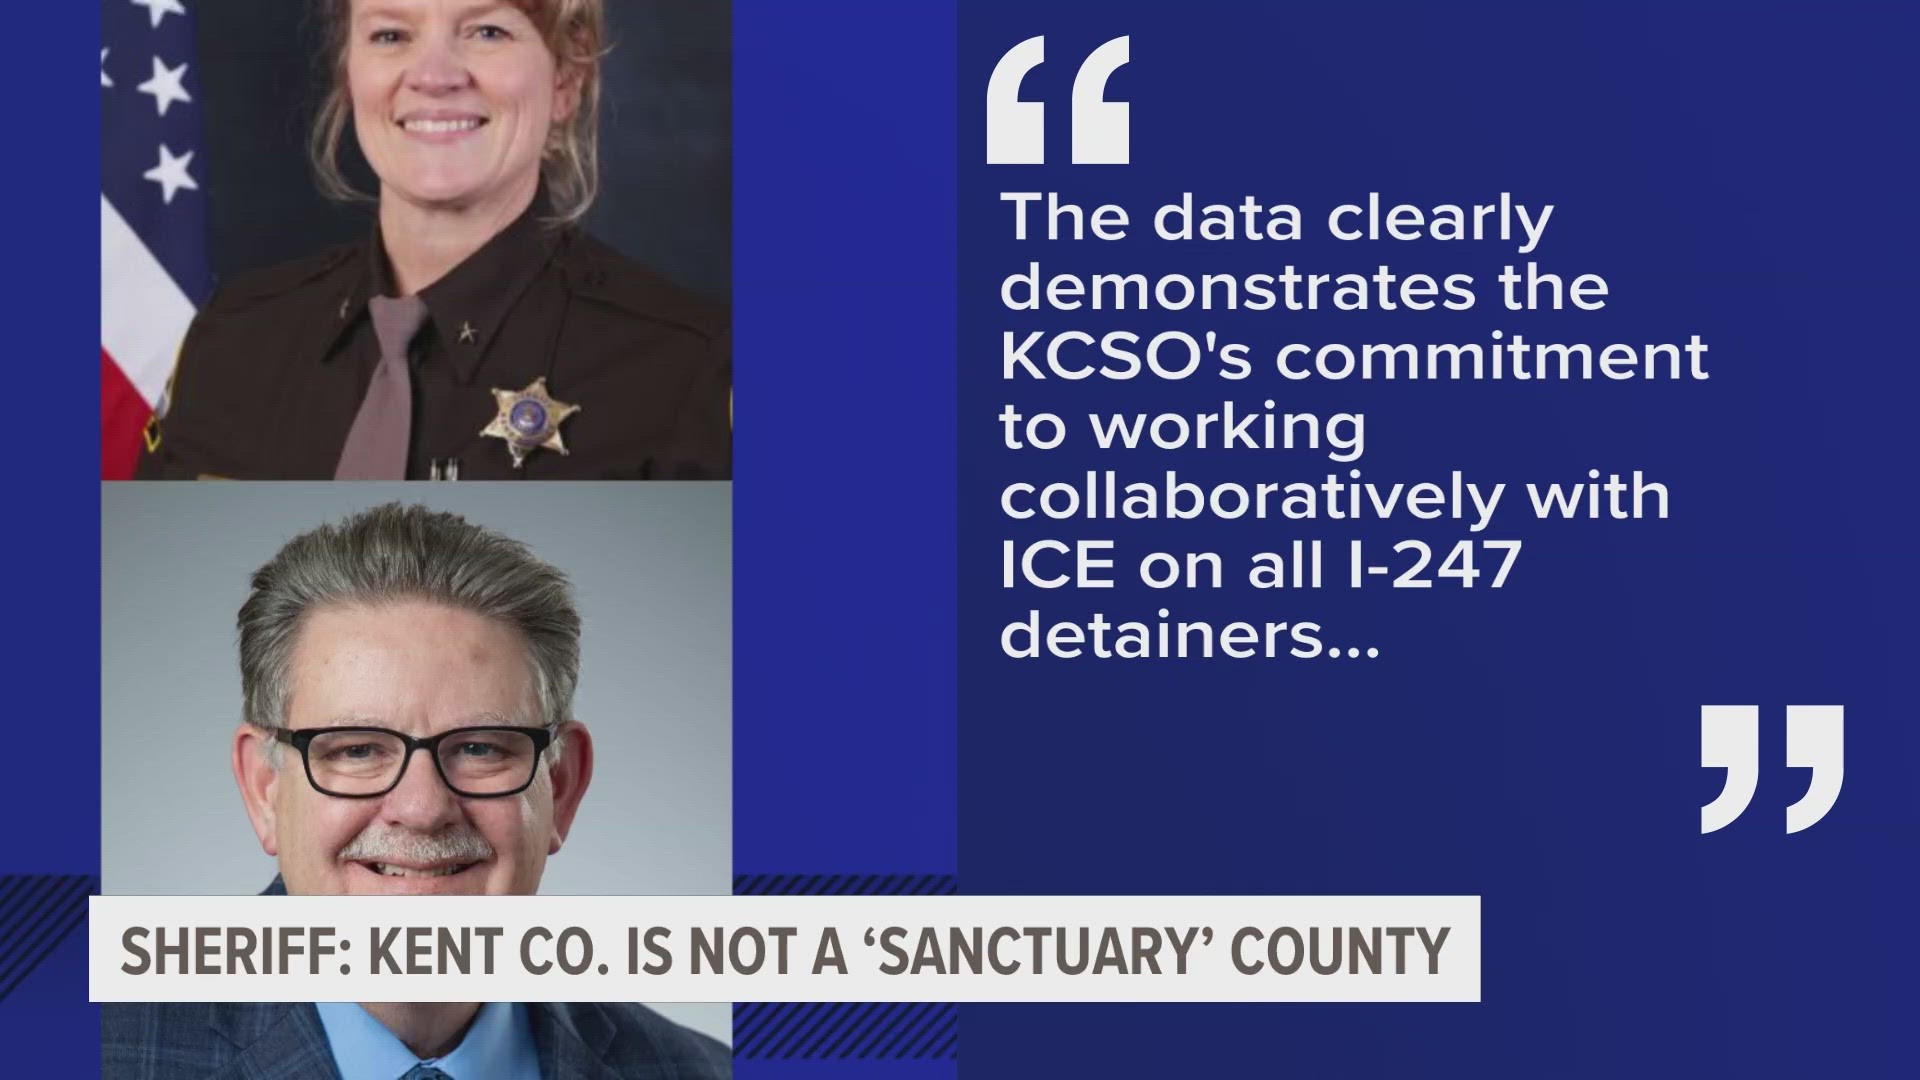 Leaders are asking that Kent County be removed from a list of sanctuary counties.